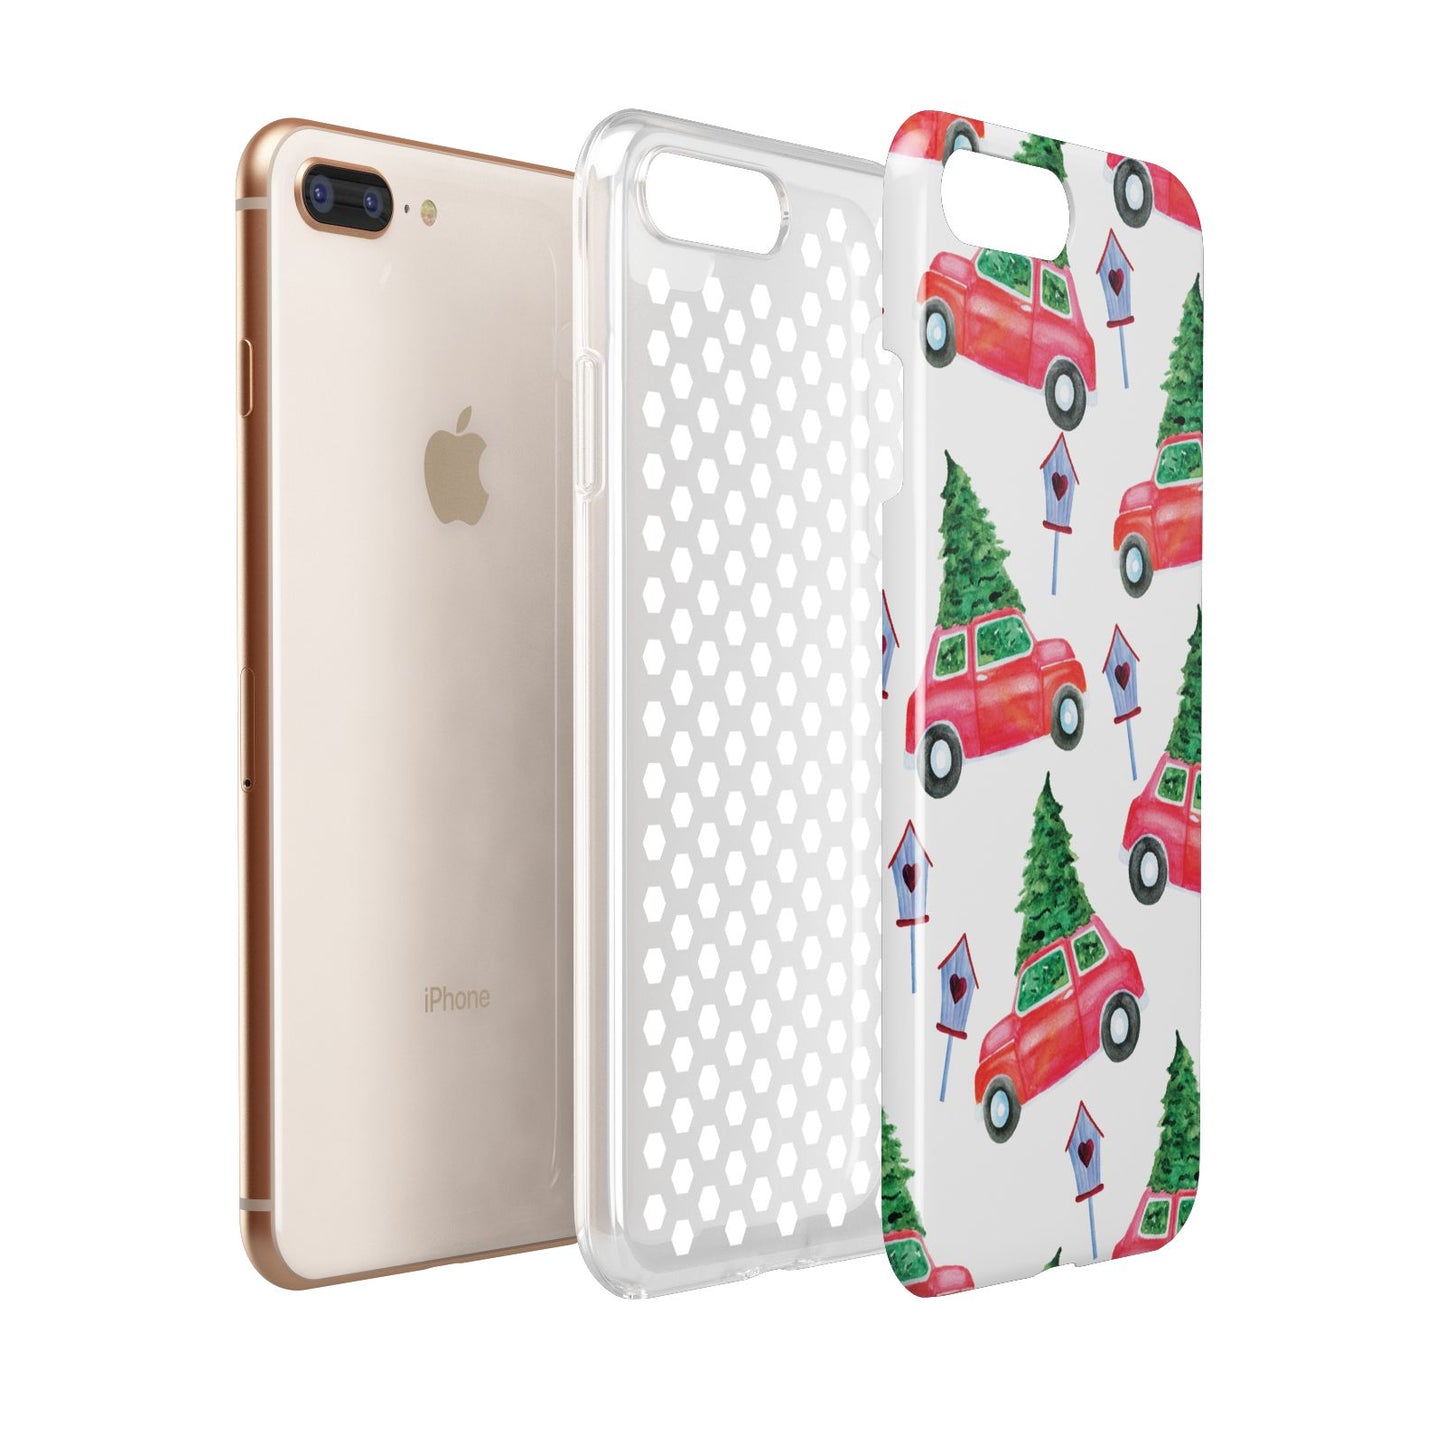 Driving home for Christmas Apple iPhone 7 8 Plus 3D Tough Case Expanded View